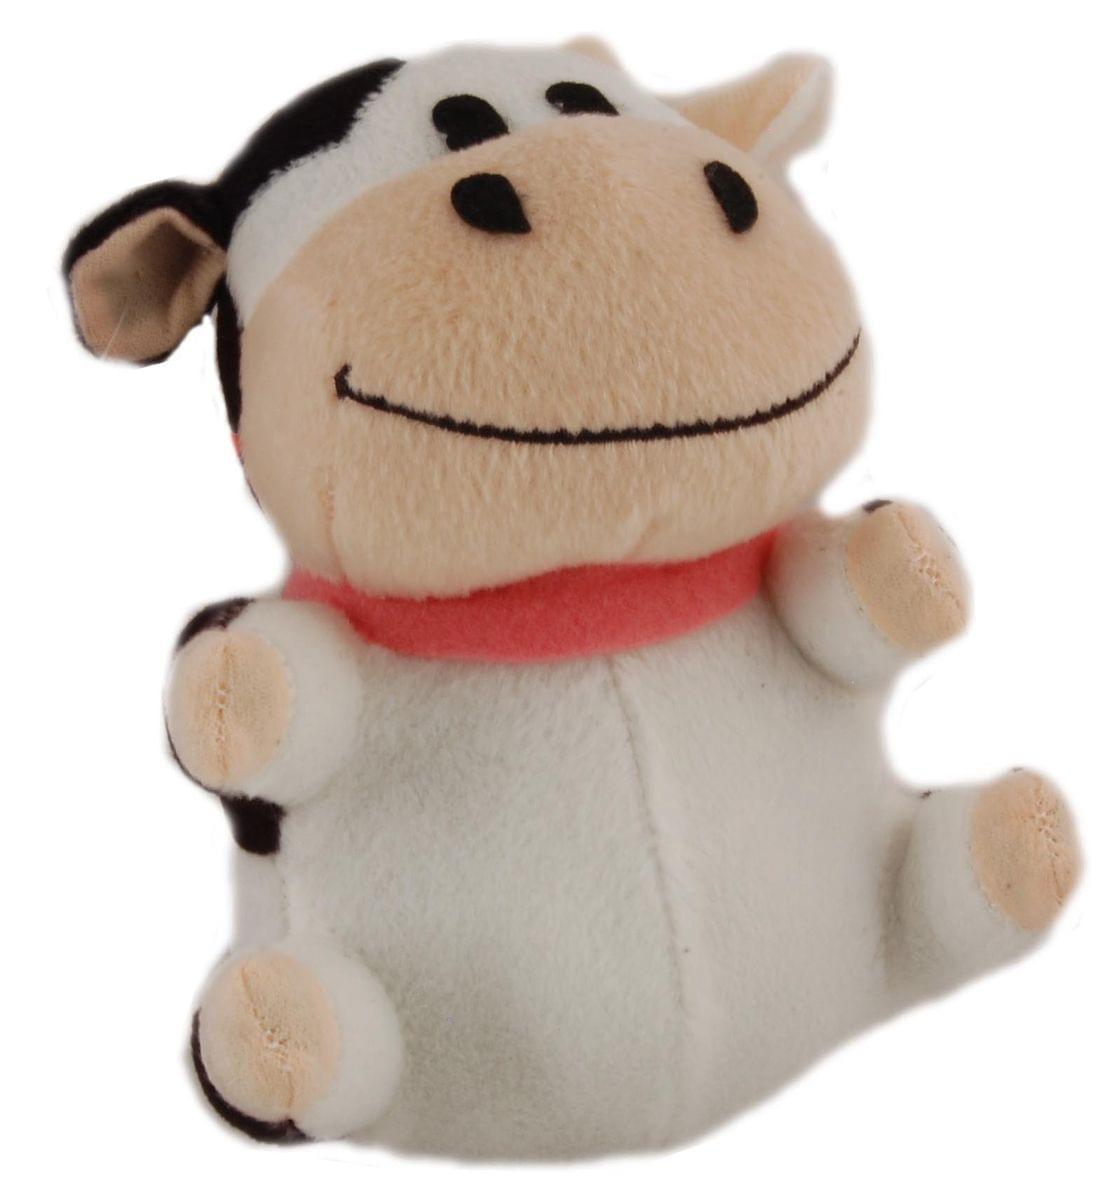 Harvest Moon Tree Of Tranquility 10th Anniversary 6.5" Plush: Cow